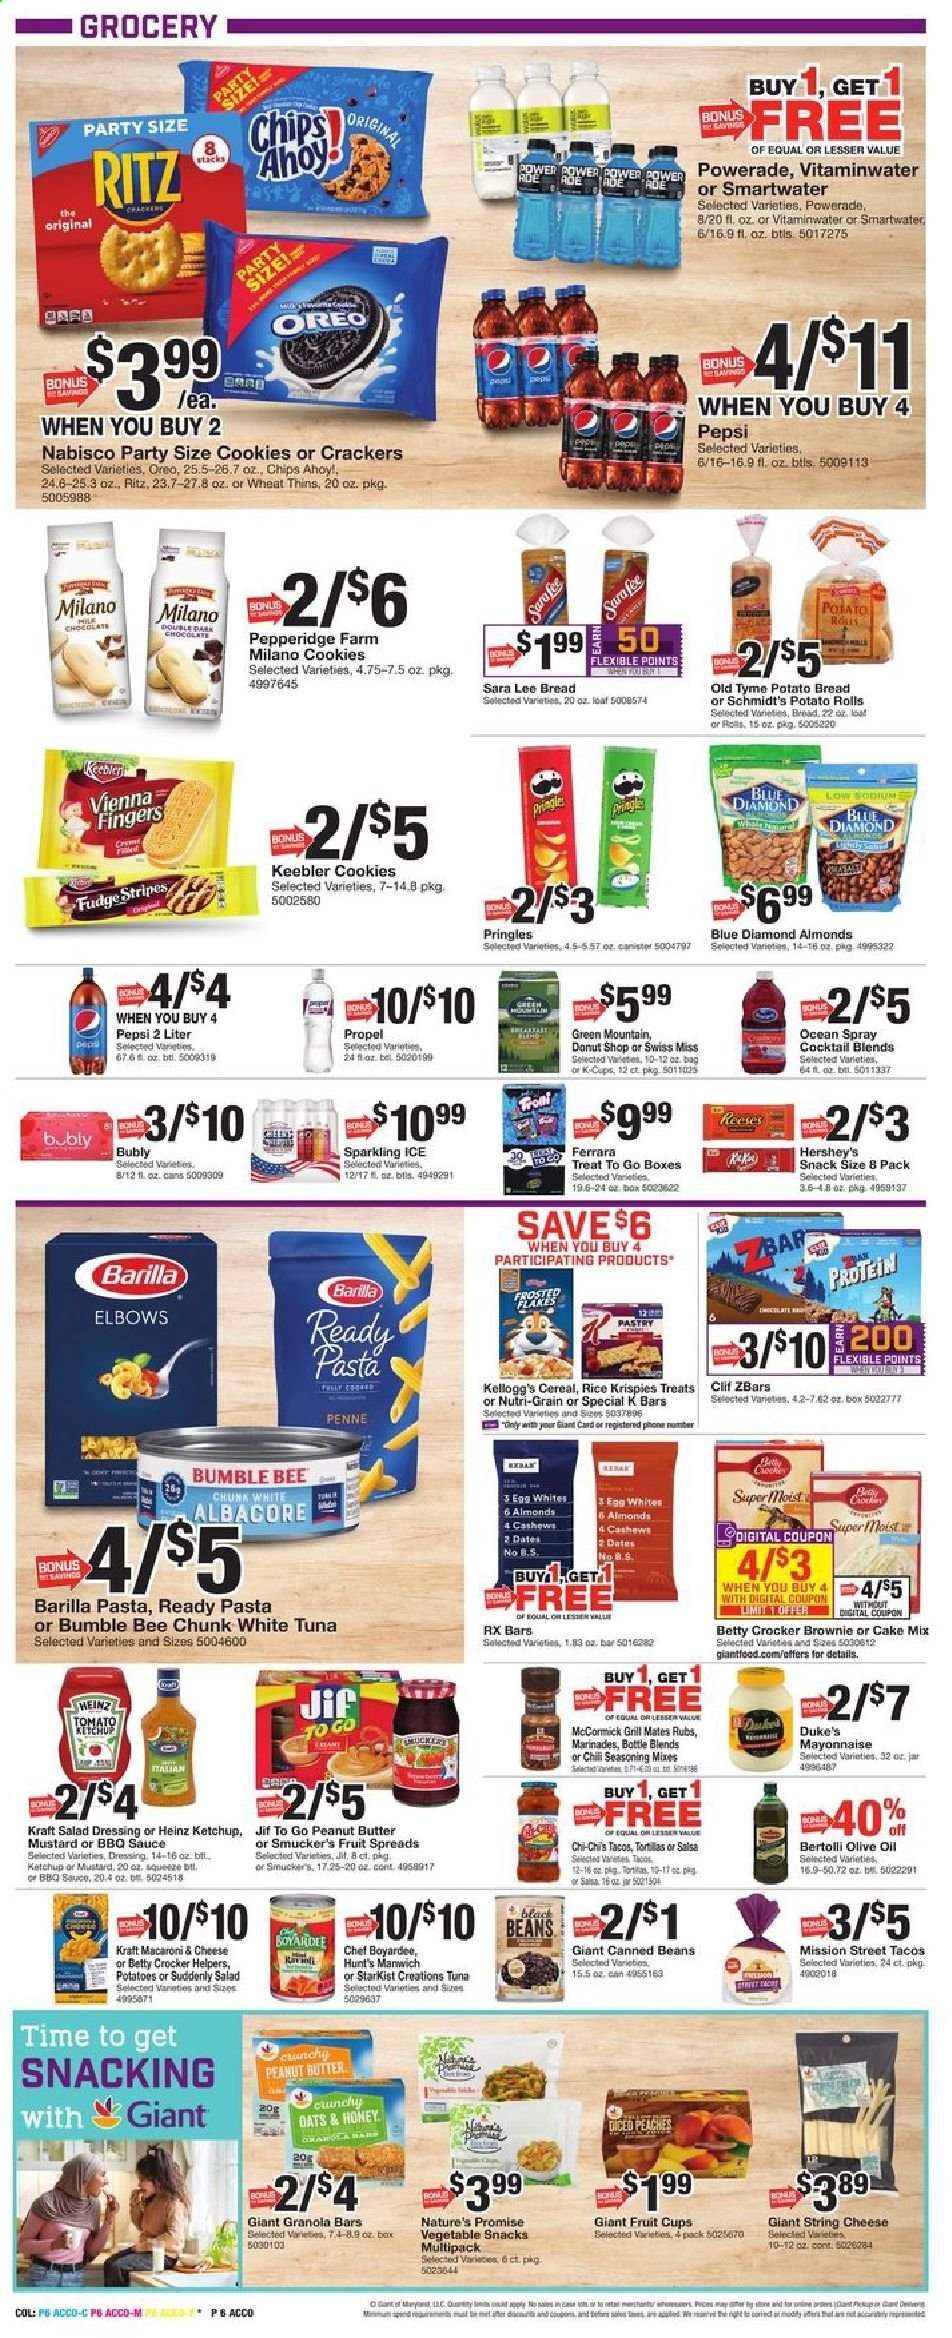 thumbnail - Giant Food Flyer - 08/27/2021 - 09/02/2021 - Sales products - fruit cup, bread, tortillas, Nature’s Promise, potato rolls, Sara Lee, Ace, cake mix, beans, potatoes, tuna, StarKist, macaroni & cheese, Bumble Bee, Barilla, Kraft®, Bertolli, string cheese, Oreo, Swiss Miss, eggs, mayonnaise, Reese's, Hershey's, cookies, fudge, vienna fingers, snack, crackers, Kellogg's, Keebler, RITZ, Pringles, chips, Thins, Heinz, Manwich, Chef Boyardee, cereals, granola bar, Rice Krispies, penne, spice, BBQ sauce, mustard, salad dressing, ketchup, dressing, salsa, olive oil, oil, peanut butter, Jif, Blue Diamond, Powerade, Pepsi, Smartwater, Green Mountain, mop. Page 6.